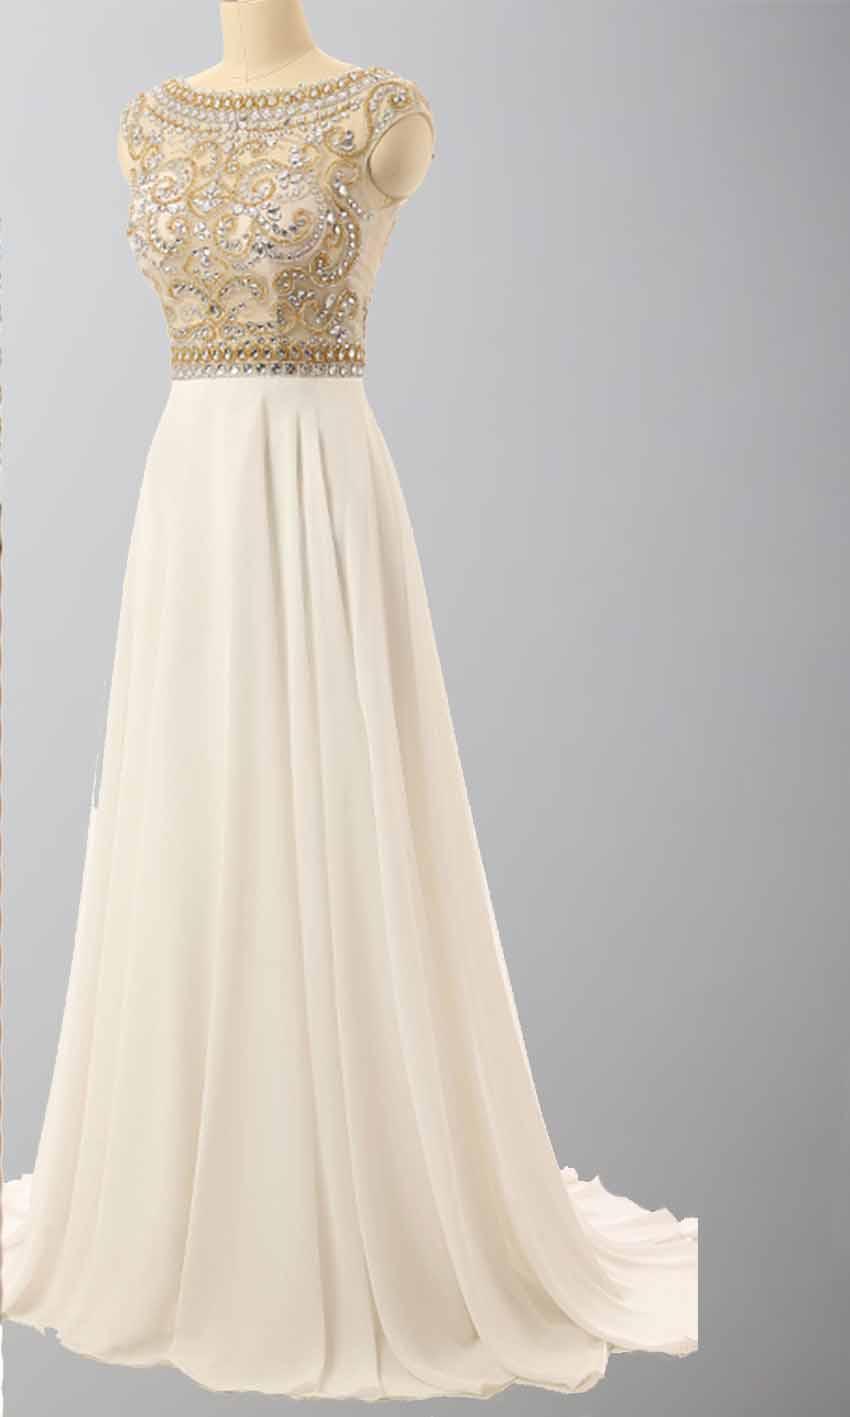 Mariage - Delicate Prom Dresses Long with Jeweled Sheer Top KSP449